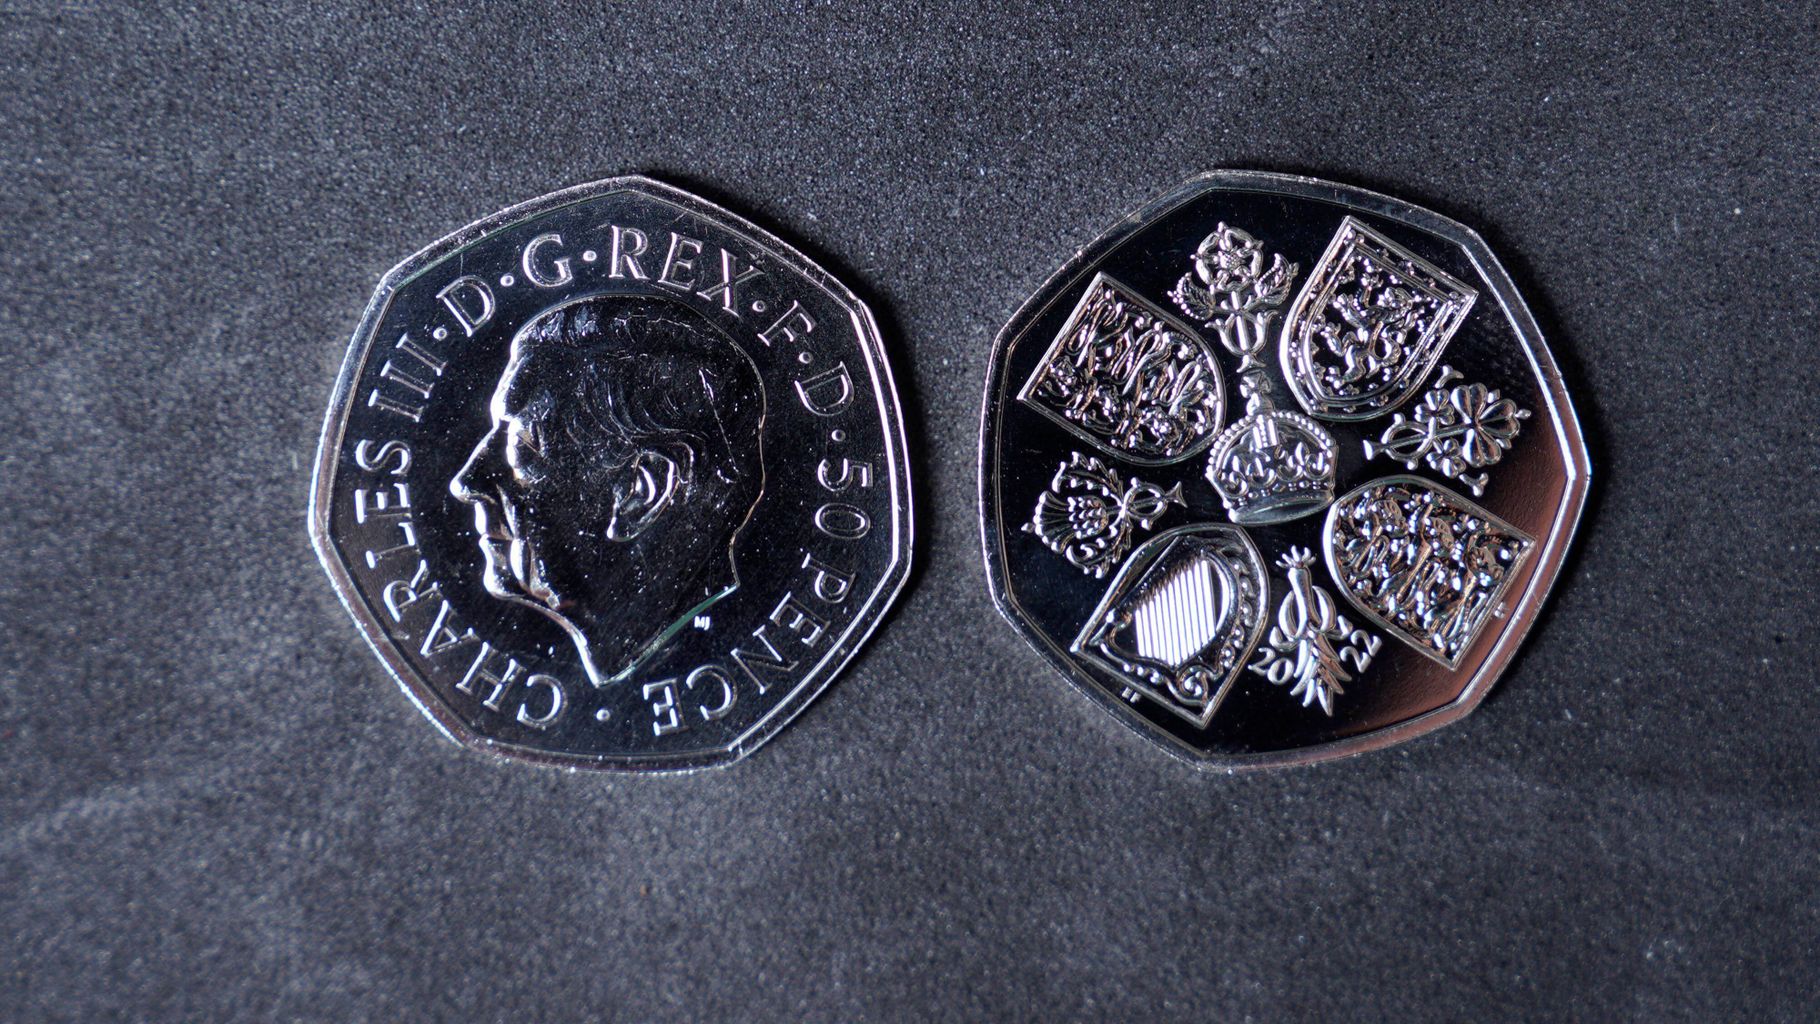 First Coins Featuring King Charles Iii Go Into Production